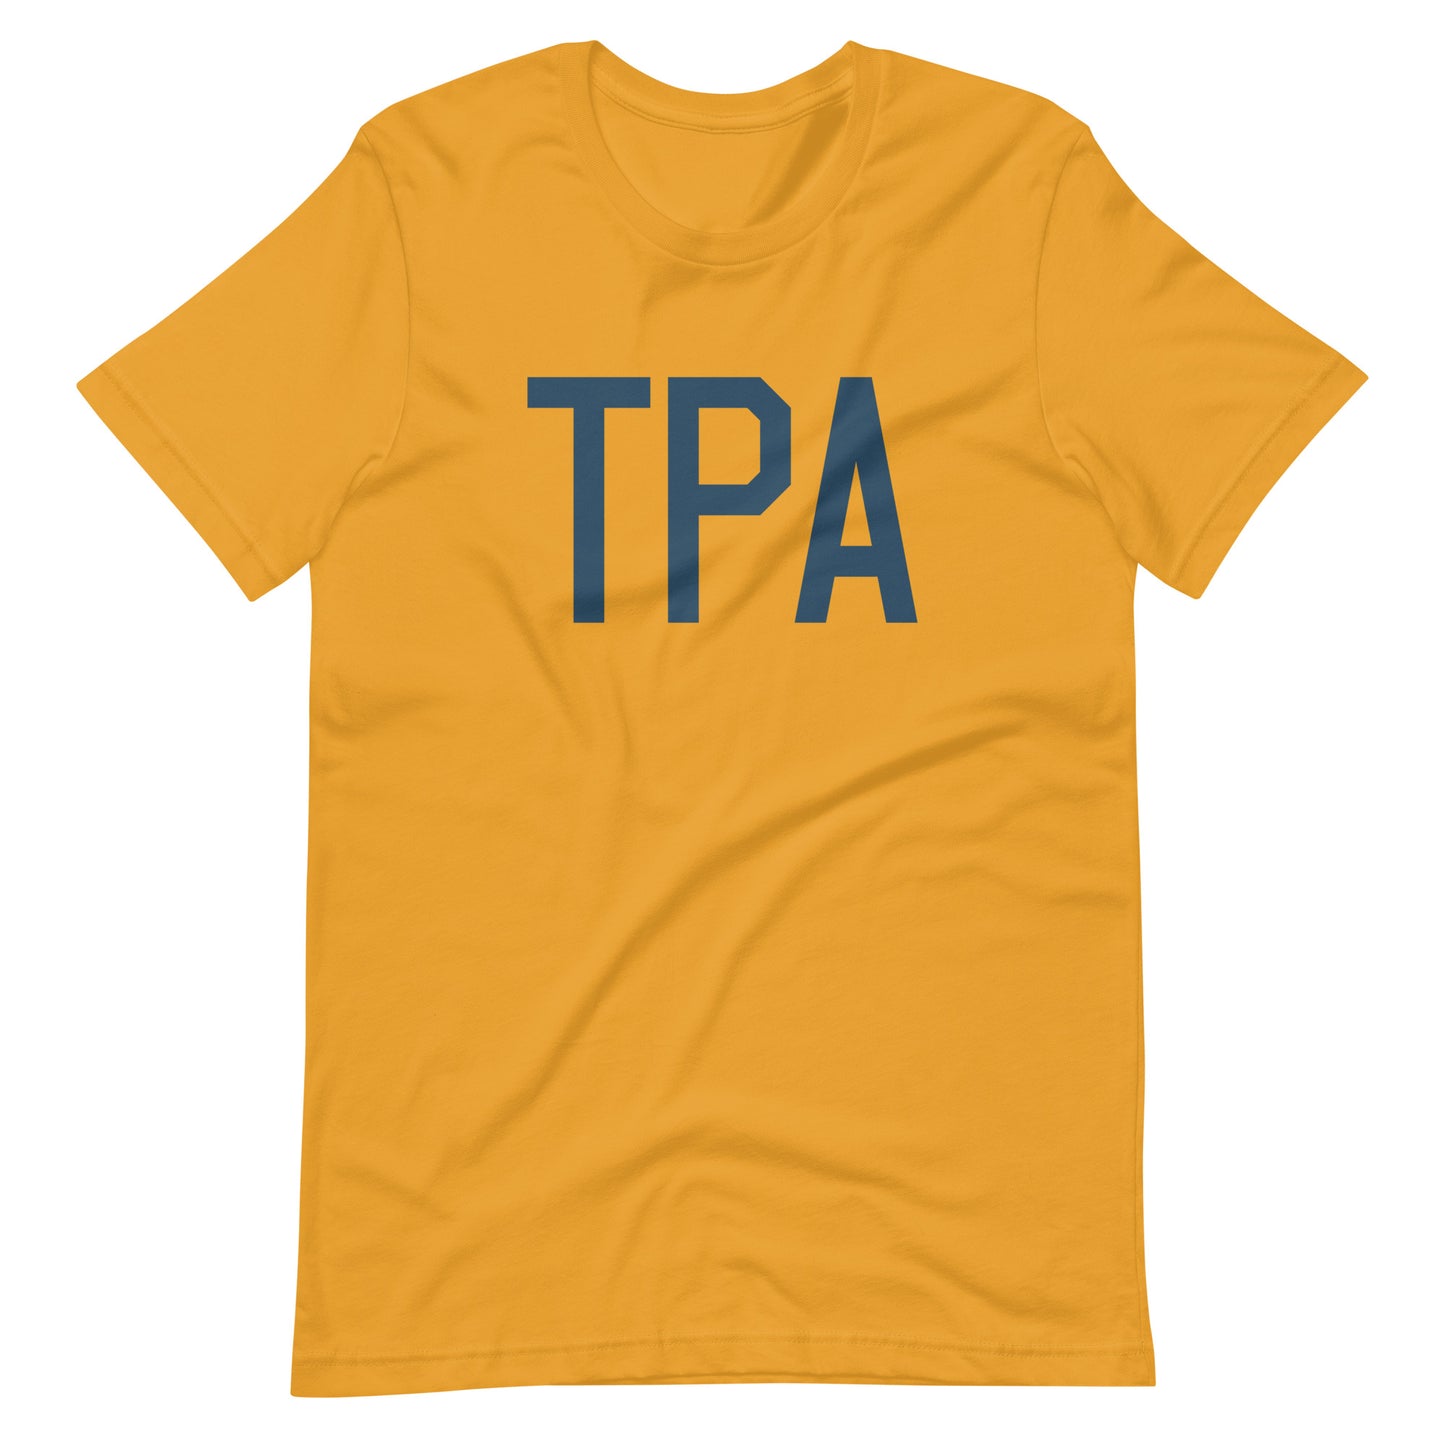 Aviation Lover Unisex T-Shirt - Blue Graphic • TPA Tampa • YHM Designs - Image 02